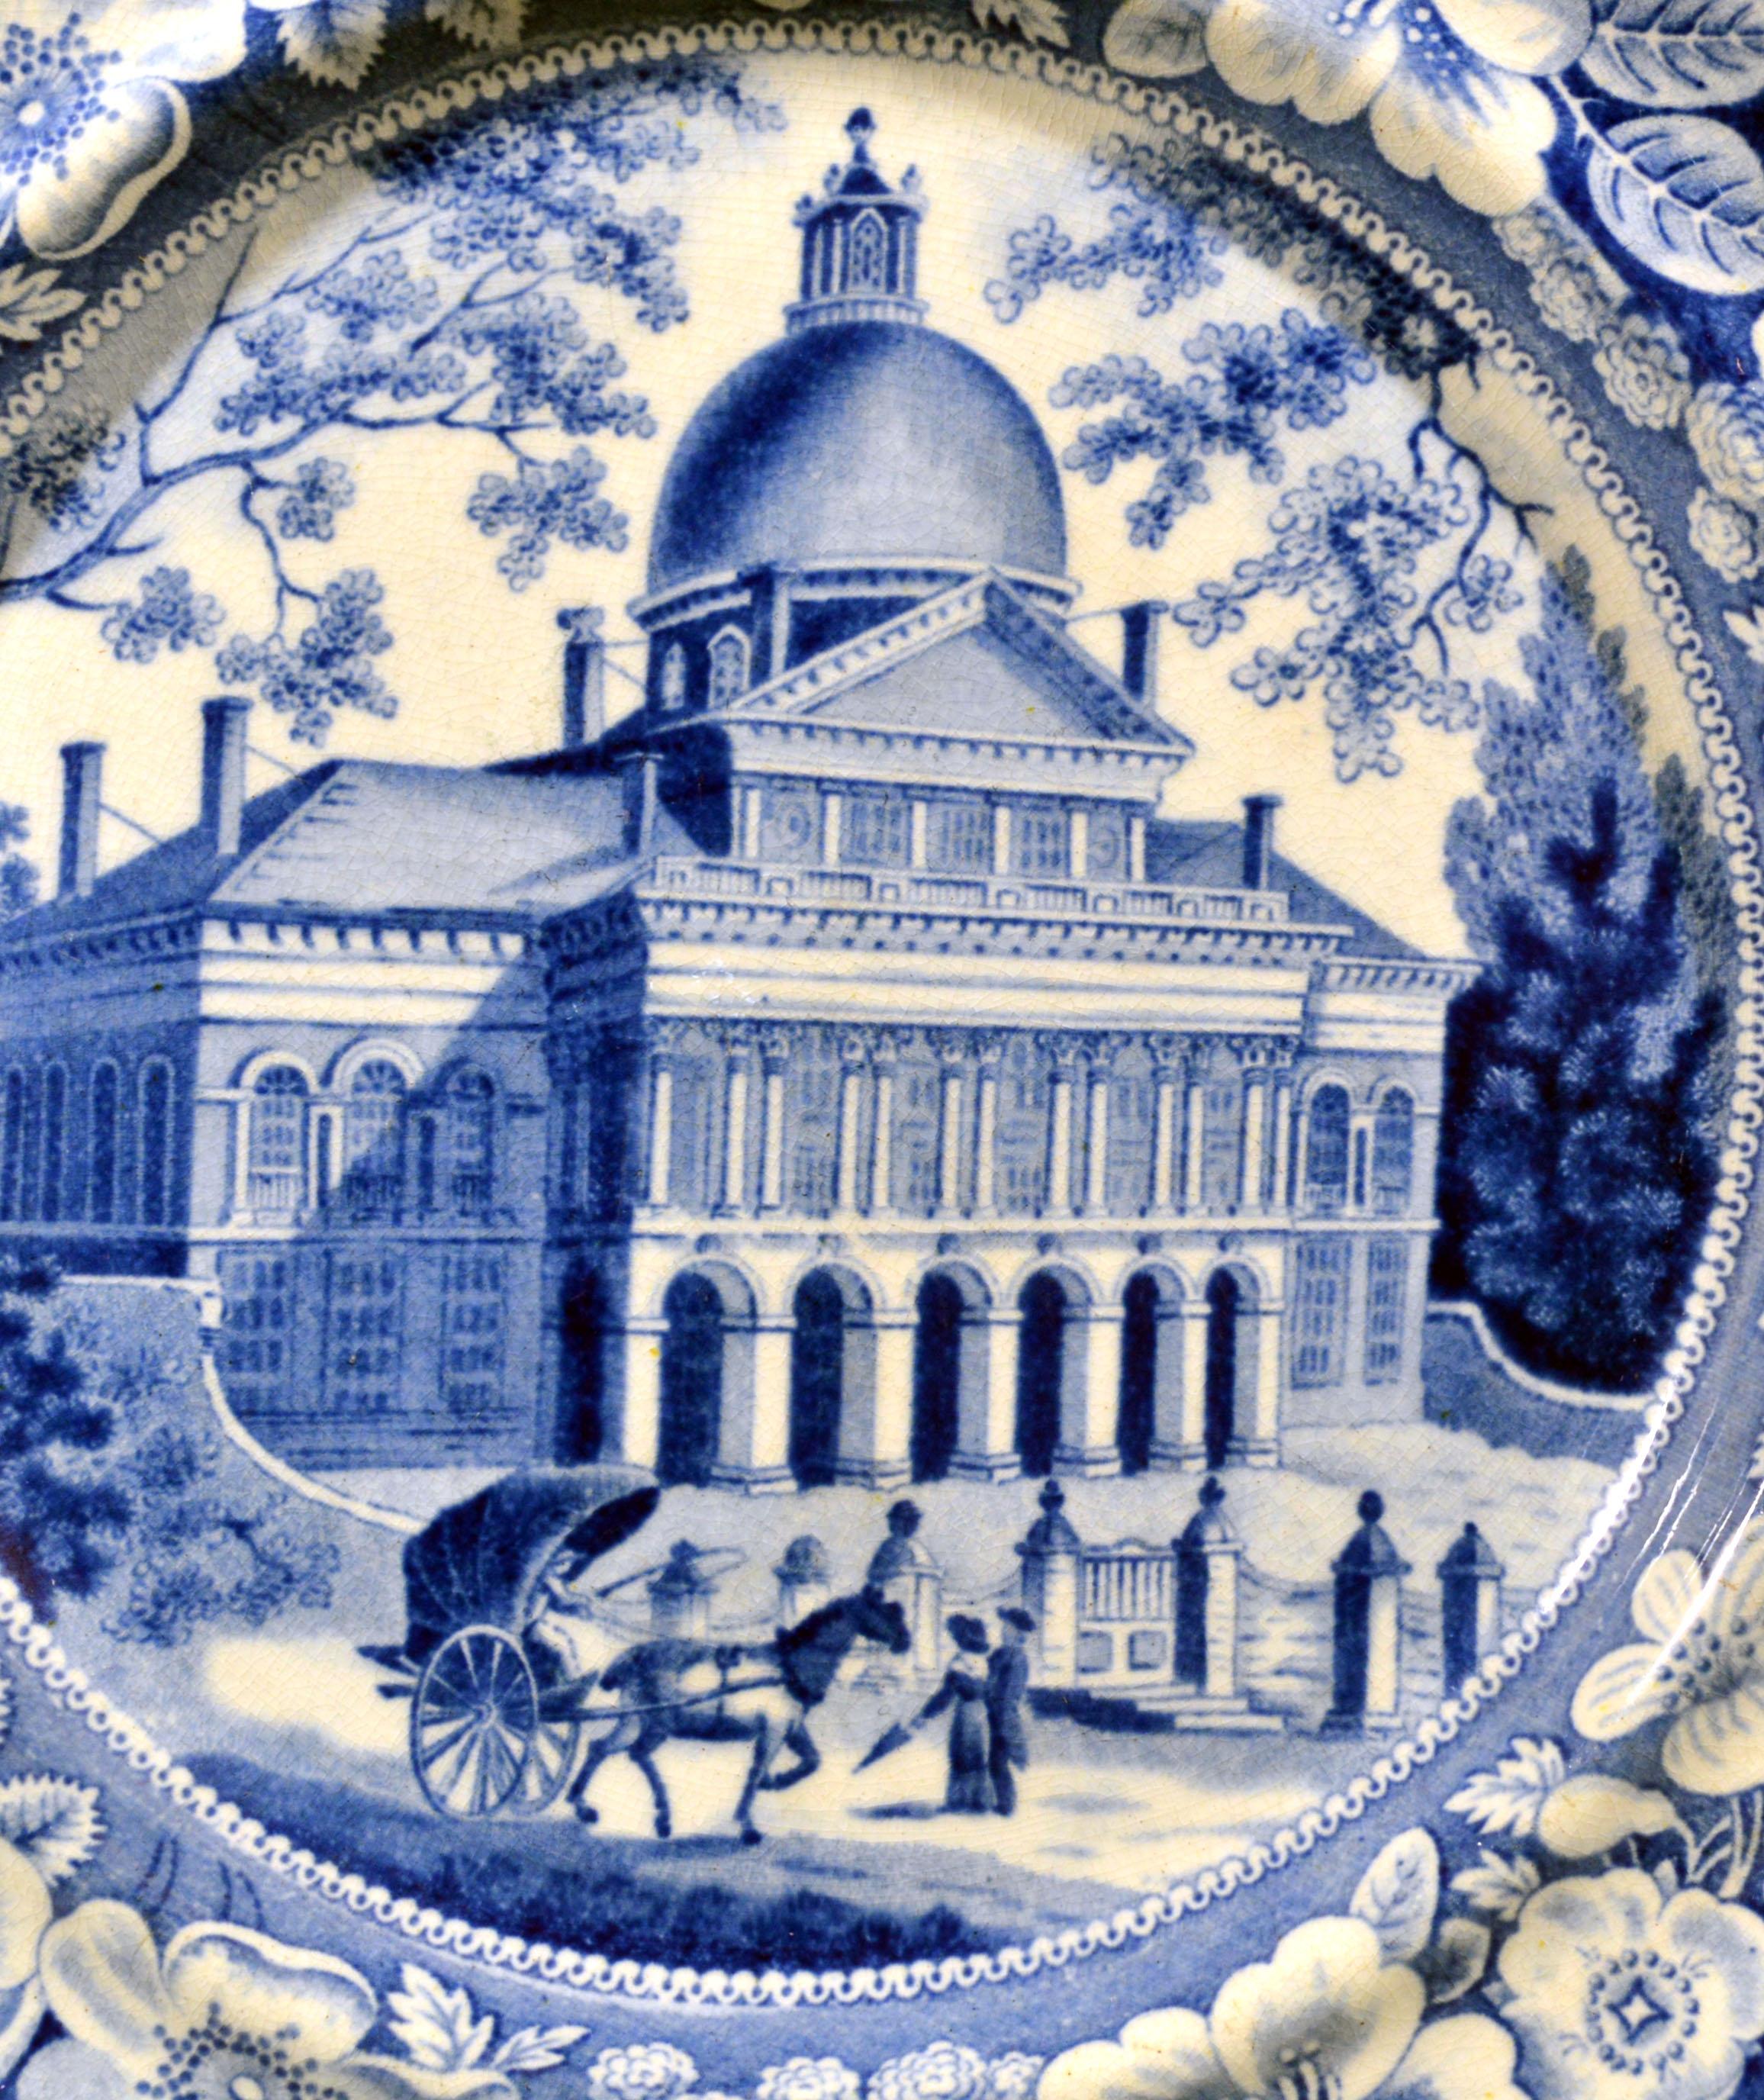 Boston State House Staffordshirepair of pottery plates
John Rogers & Son,
1825

This Rogers underglaze blue printed plate of the Boston State House is No. 01 of three versions of the Boston State House by Rogers.
 
Built around 1795, the